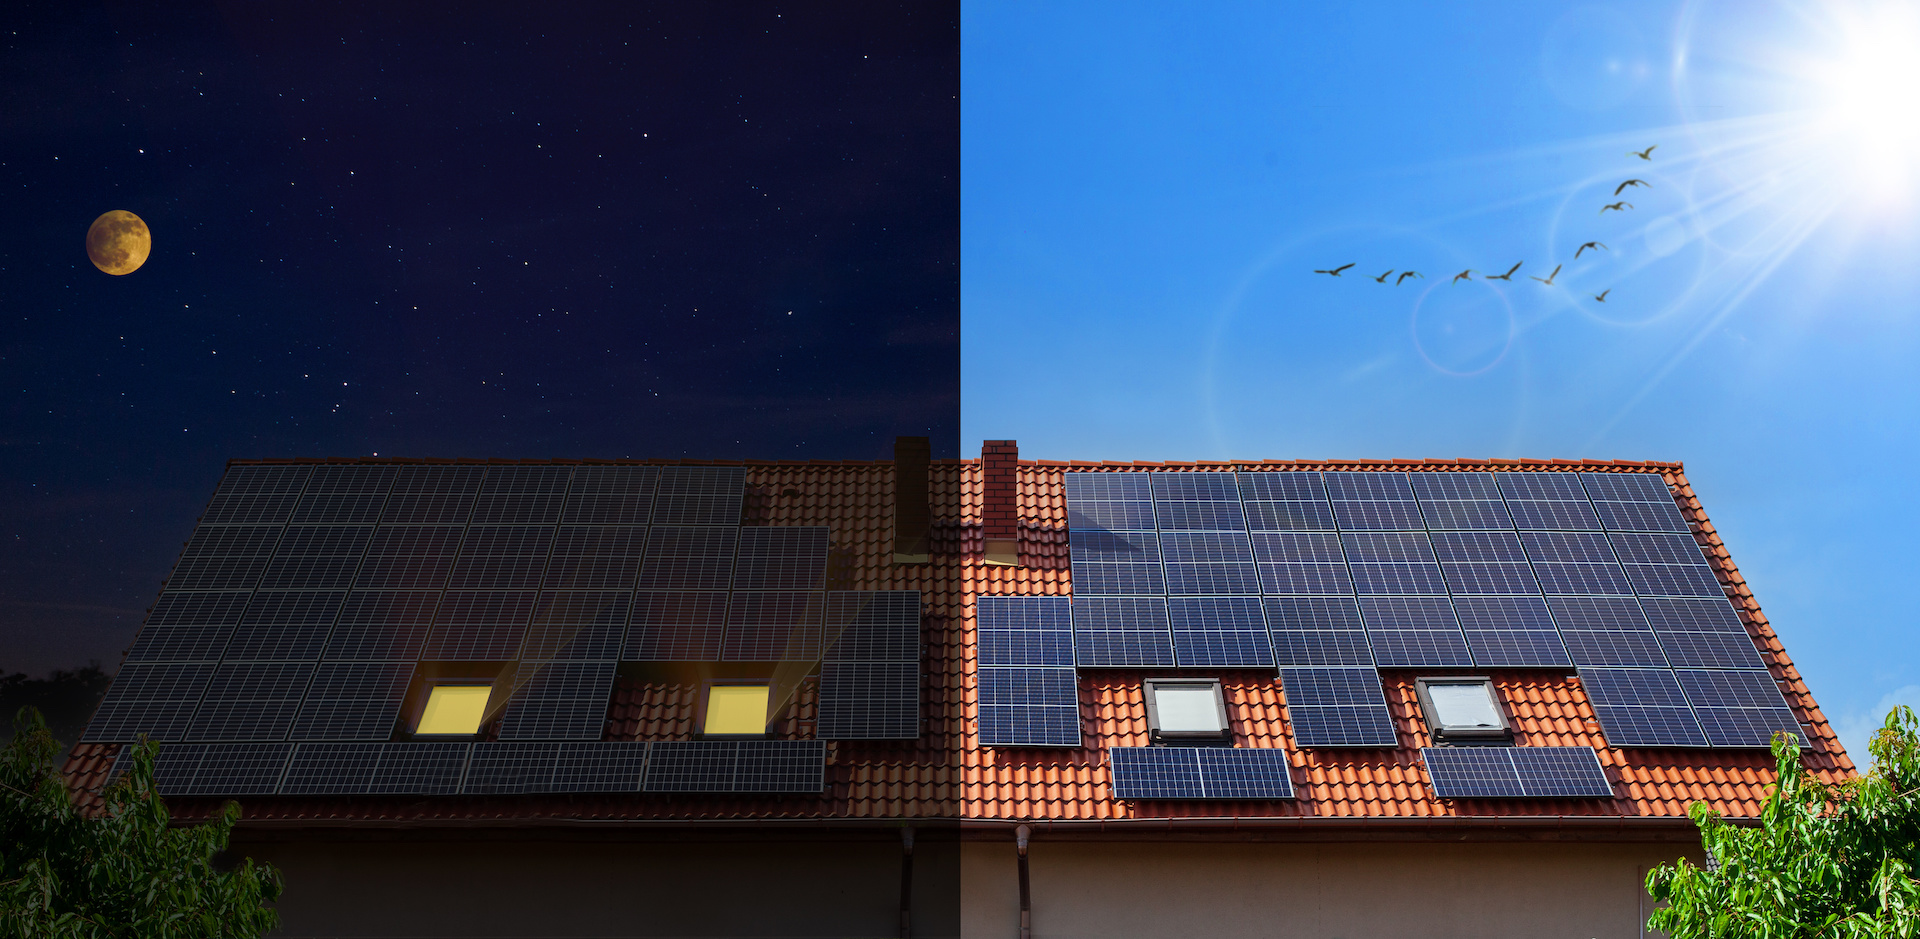 Conceptual Image Solar Energy. Modern House And Solar Panels Ont Day And At Night Concept.